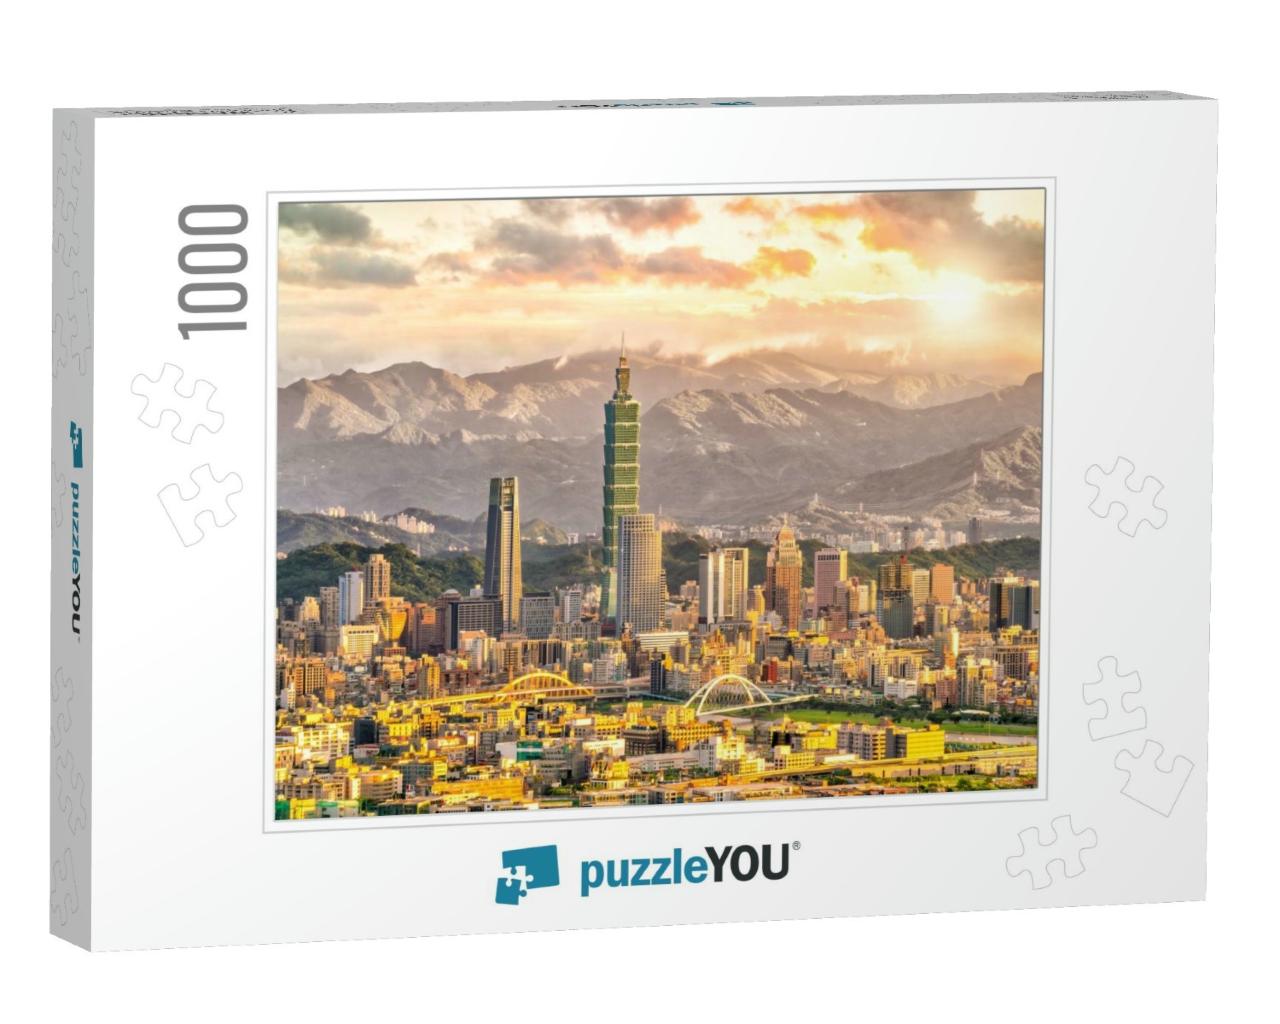 Taipei City Skyline Landscape At Sunset Time in Taiwan... Jigsaw Puzzle with 1000 pieces